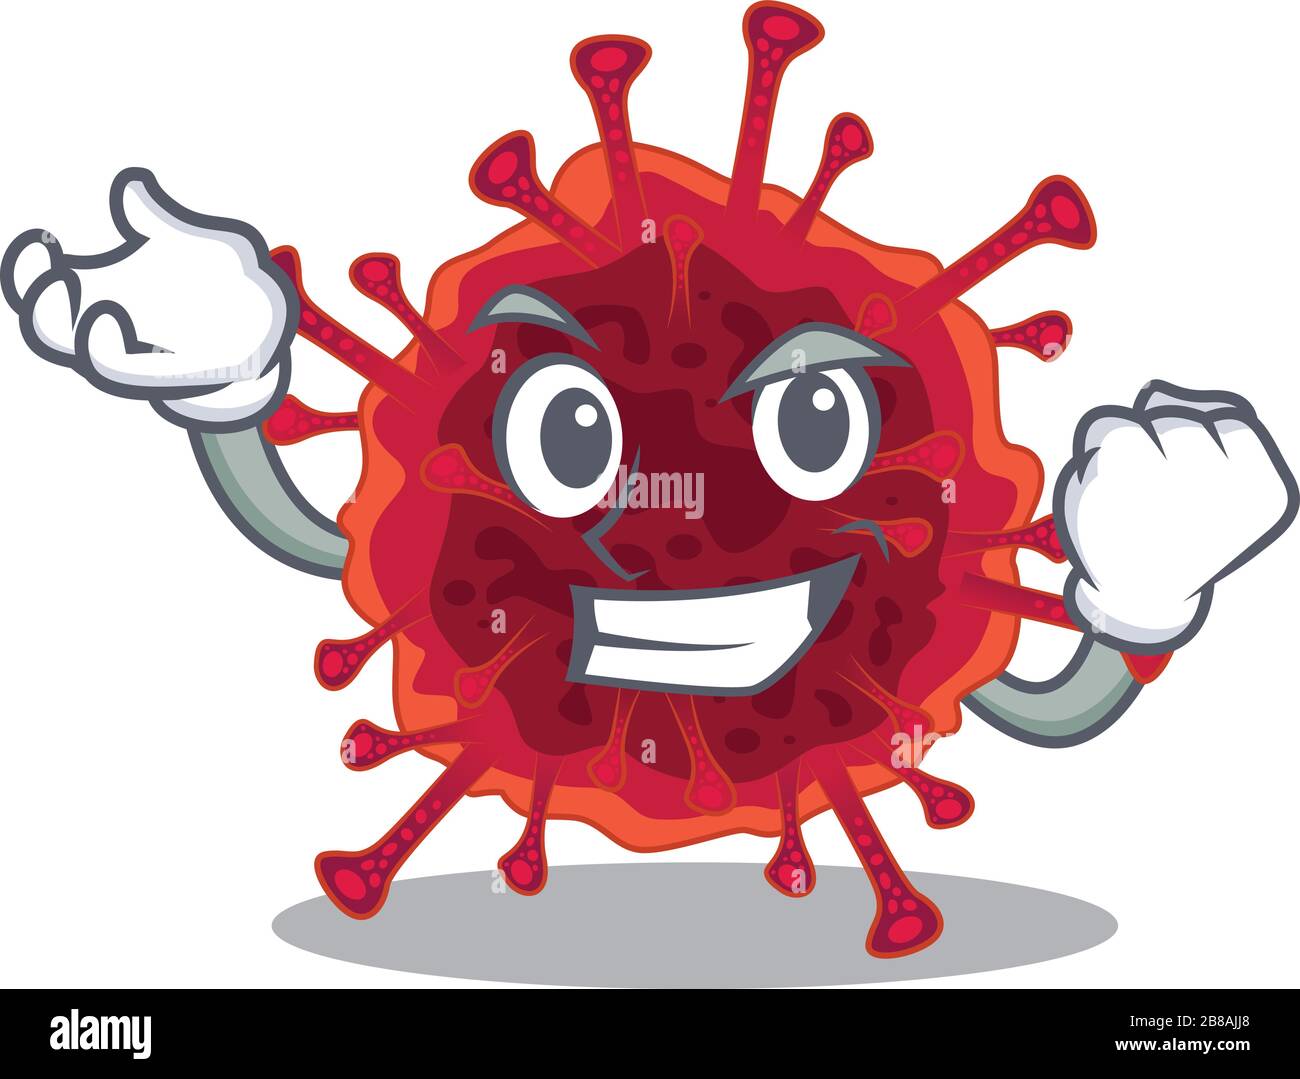 Pedacovirus cartoon character style with happy face Stock Vector